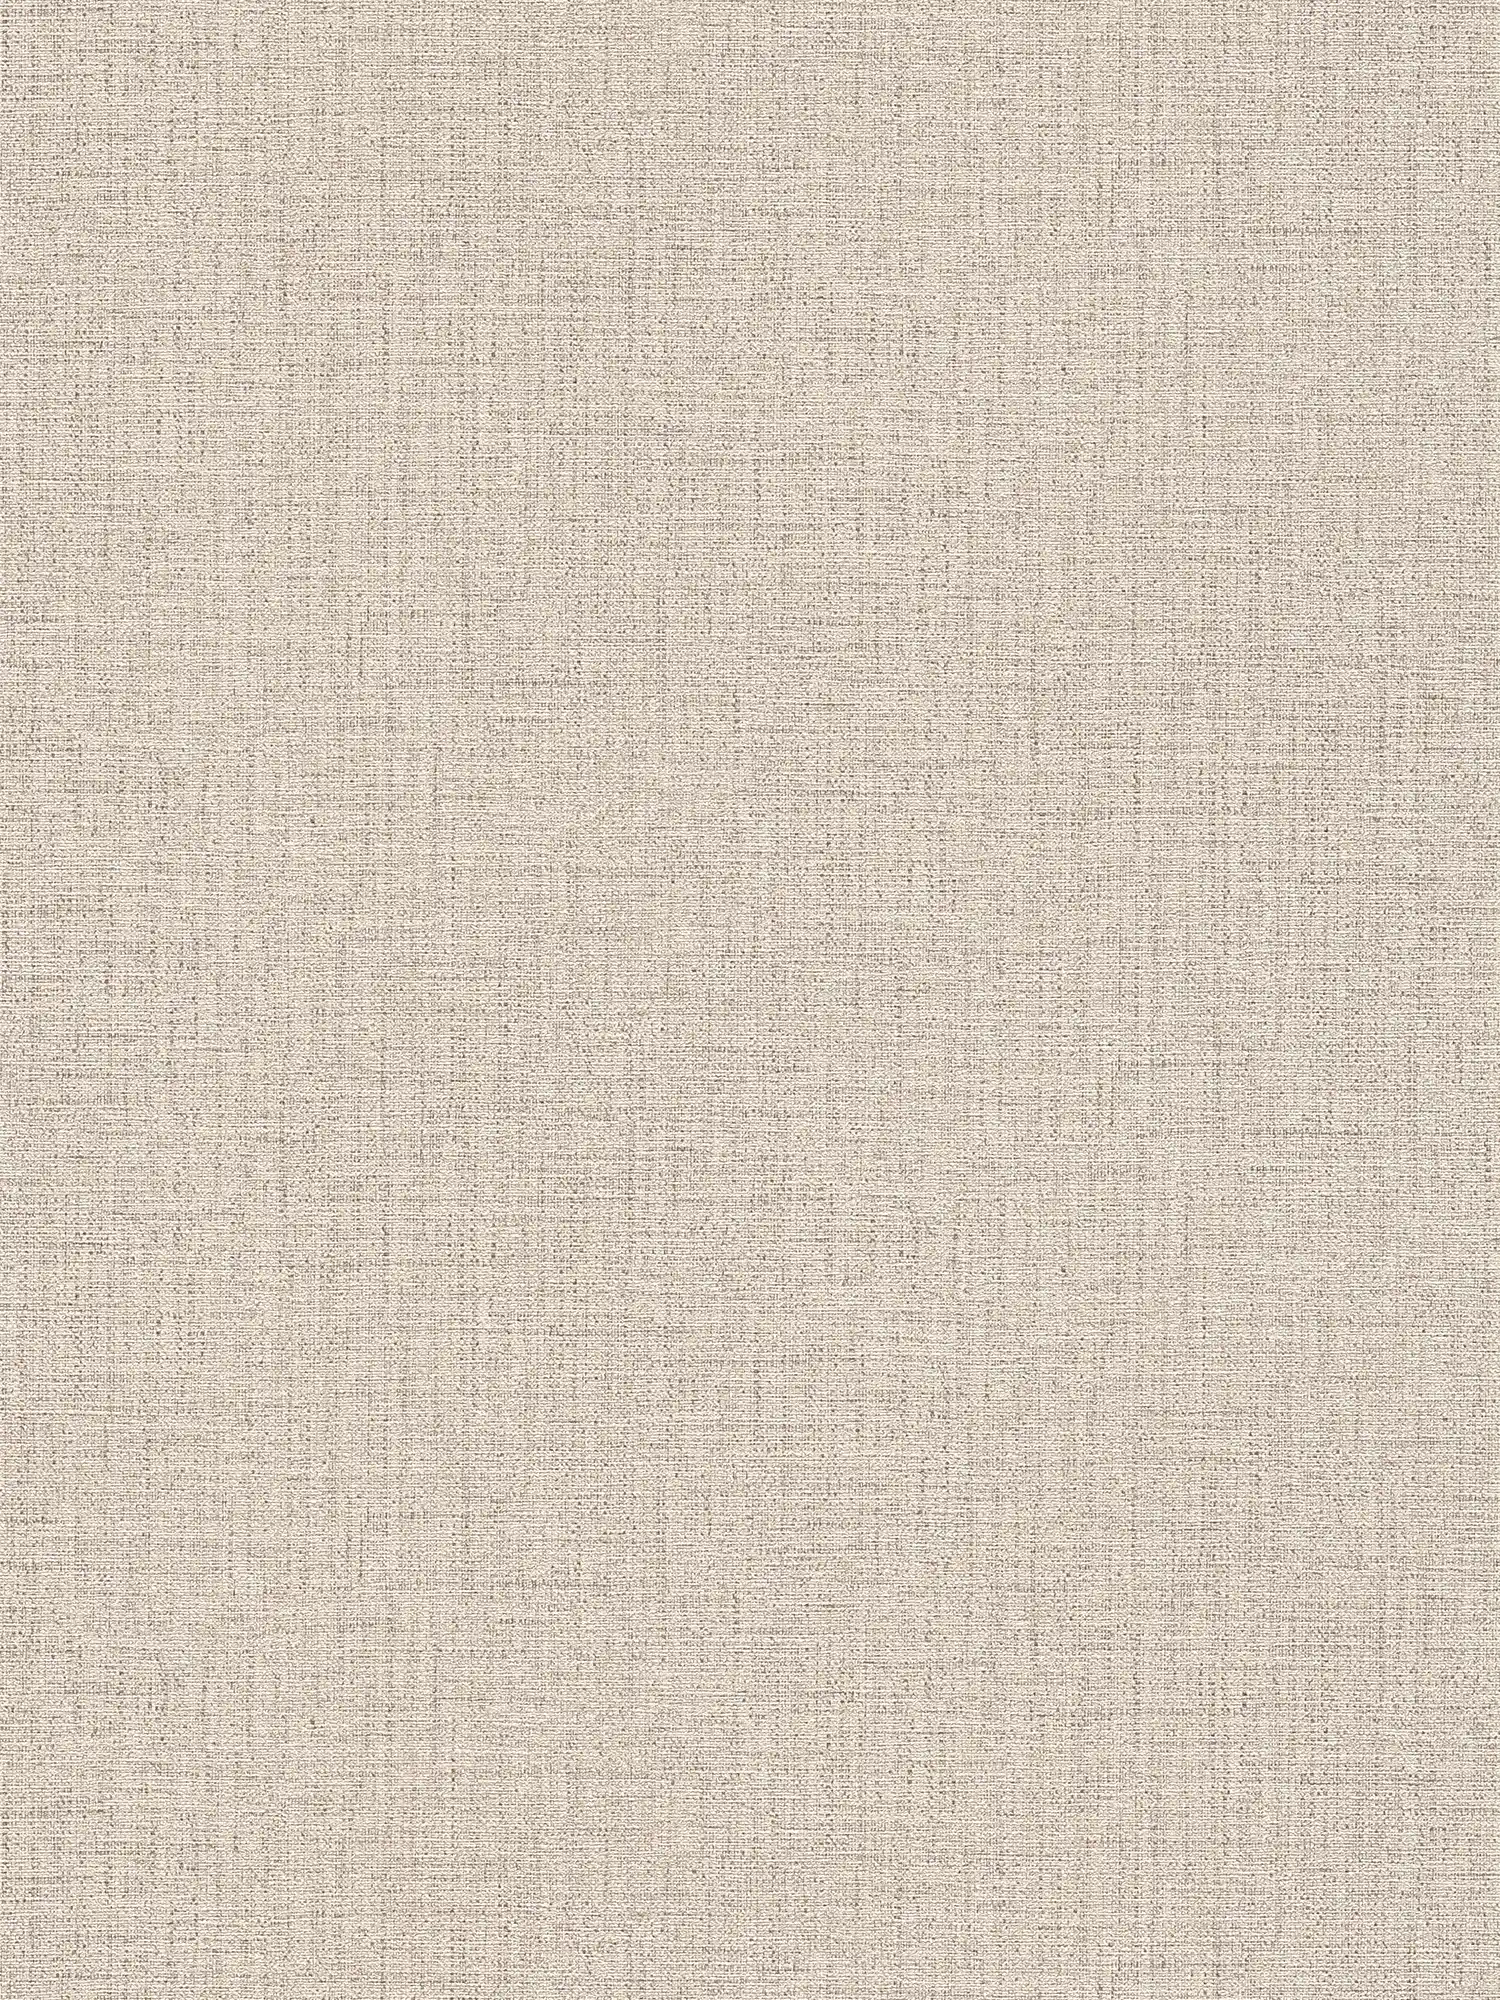 Beige wallpaper with textile texture & mottled effect
